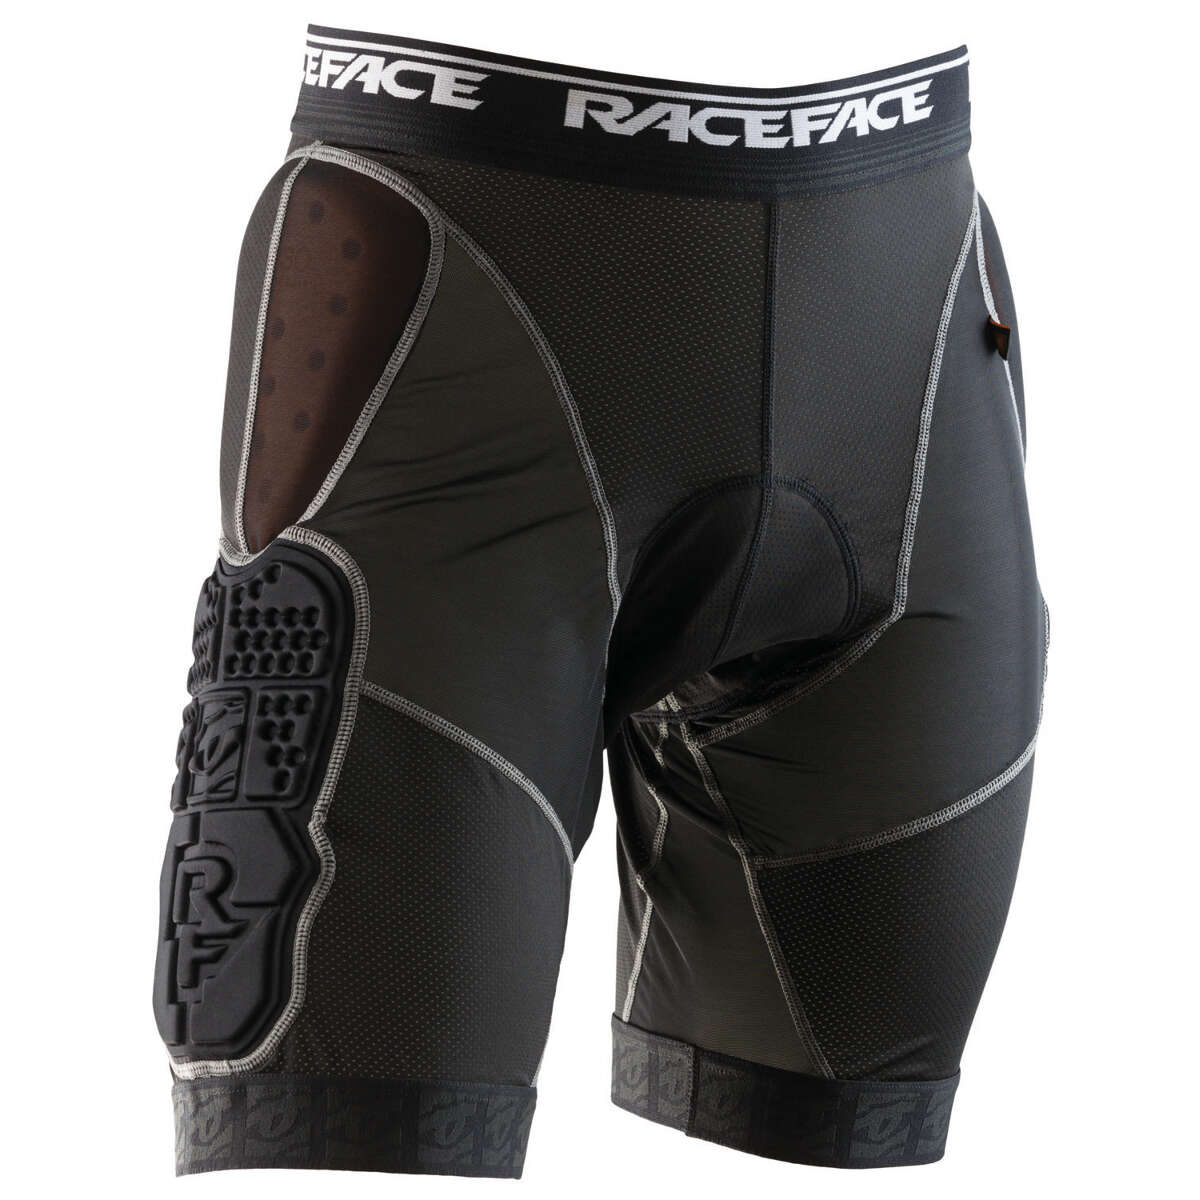 Race Face Protector Shorts Flank Liner Stealth